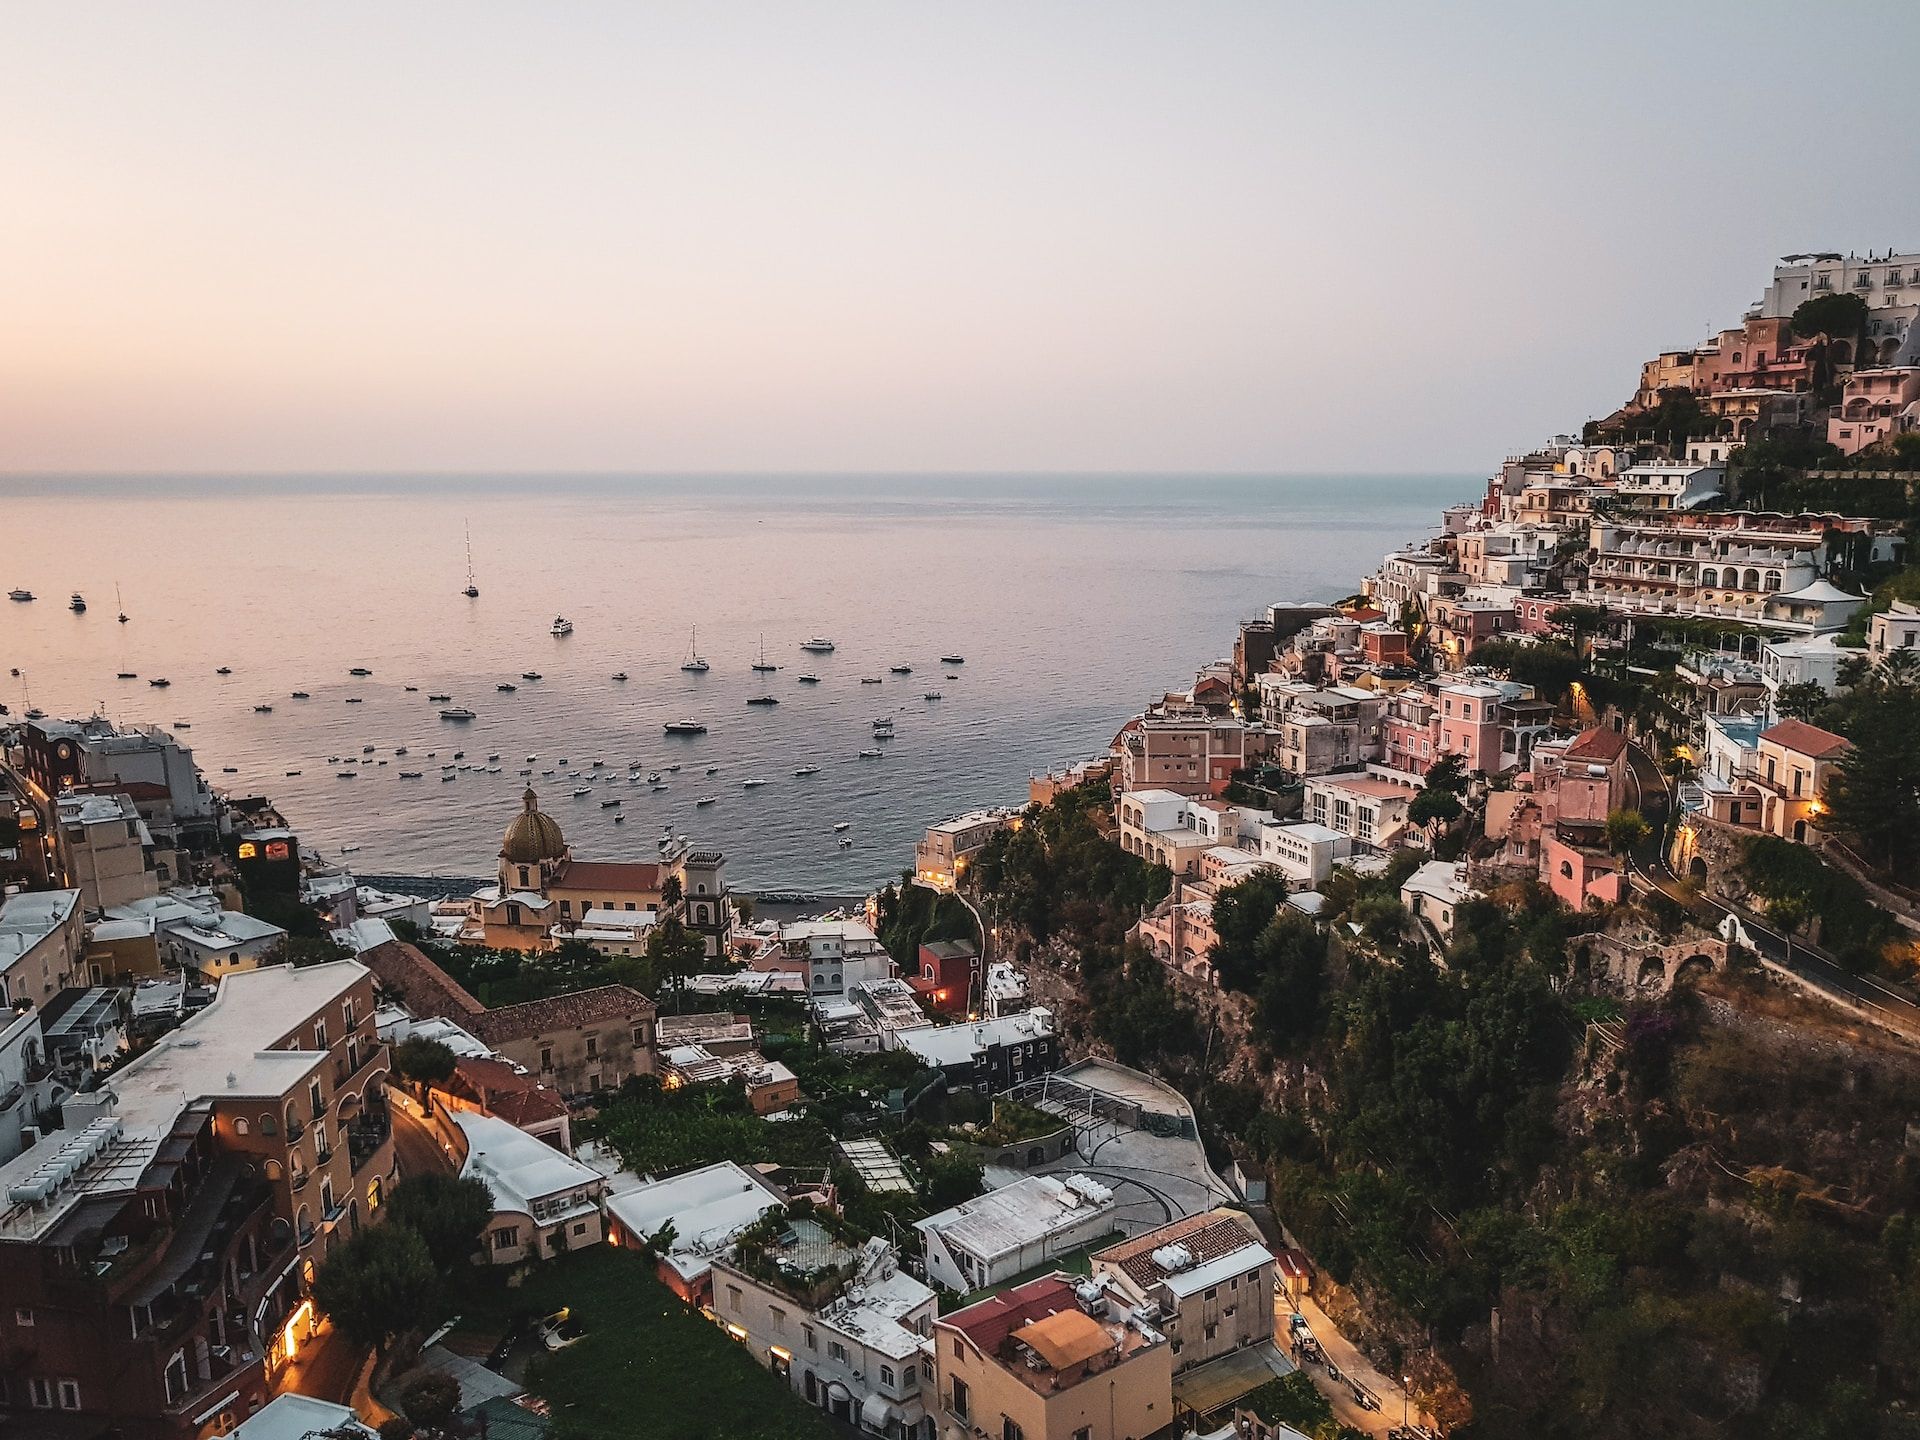 An aerial view of the coastal town of Positano at dusk on the Amalfi Coast